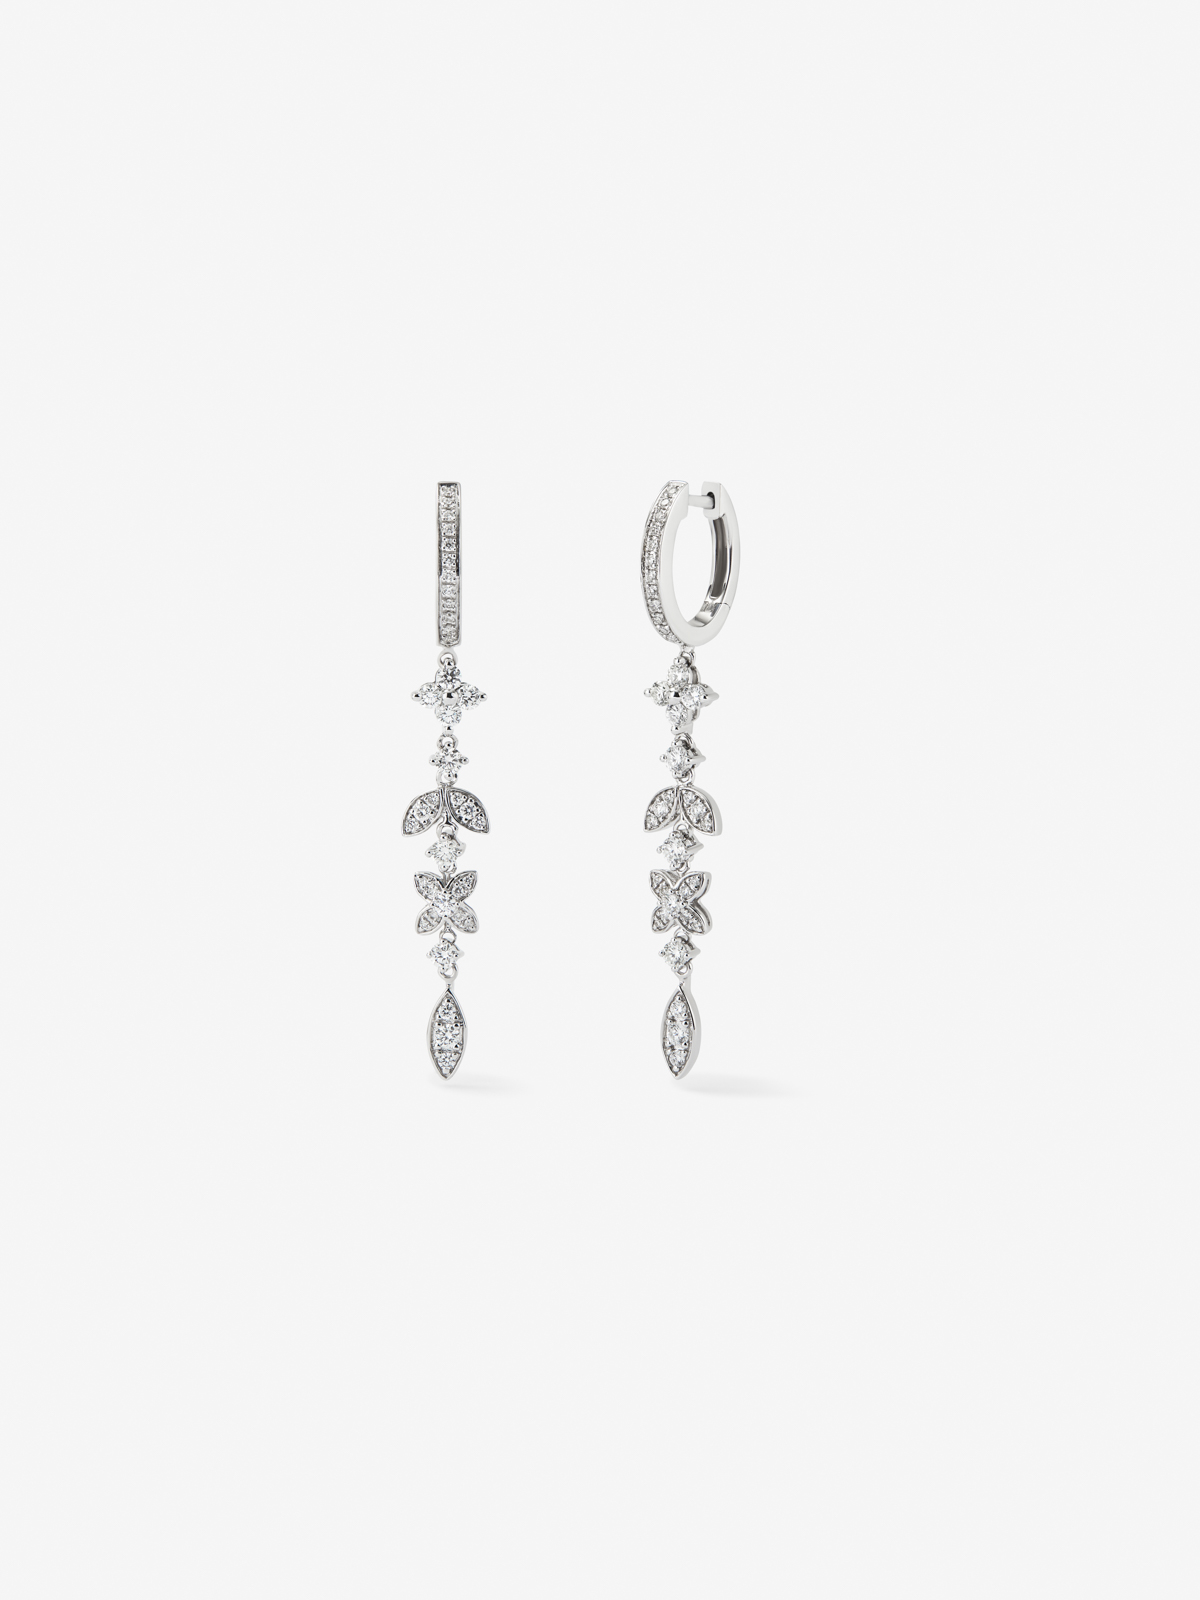 18K white gold earrings with 0.87 ct brilliant cut diamonds